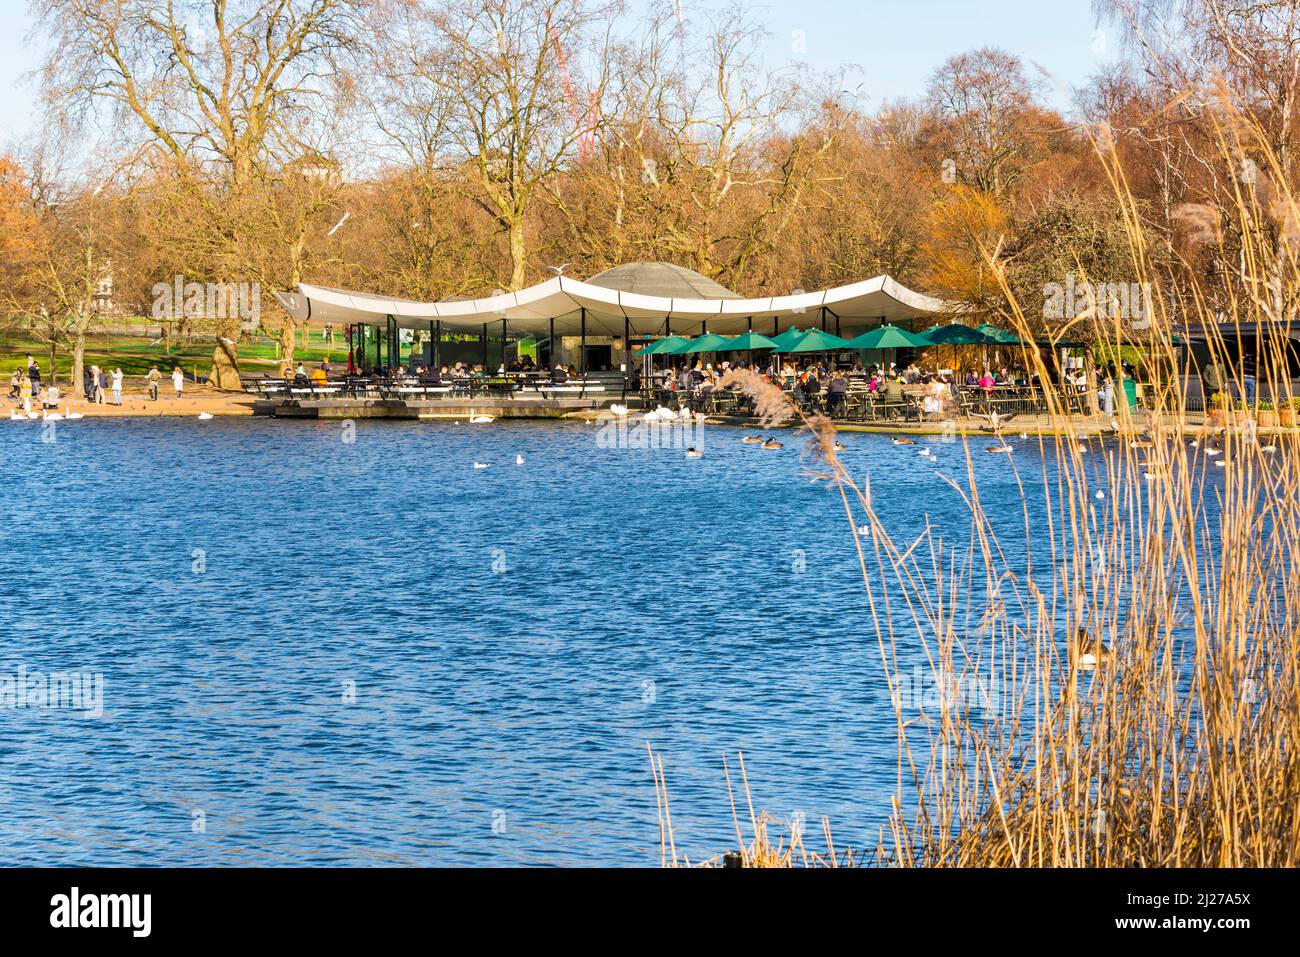 People relaxing and enjoying themselves outdoors at a cafe, the Serpentine Bar and Kitchen, in Hyde Park, London on a bright sunny winter's day. Stock Photo